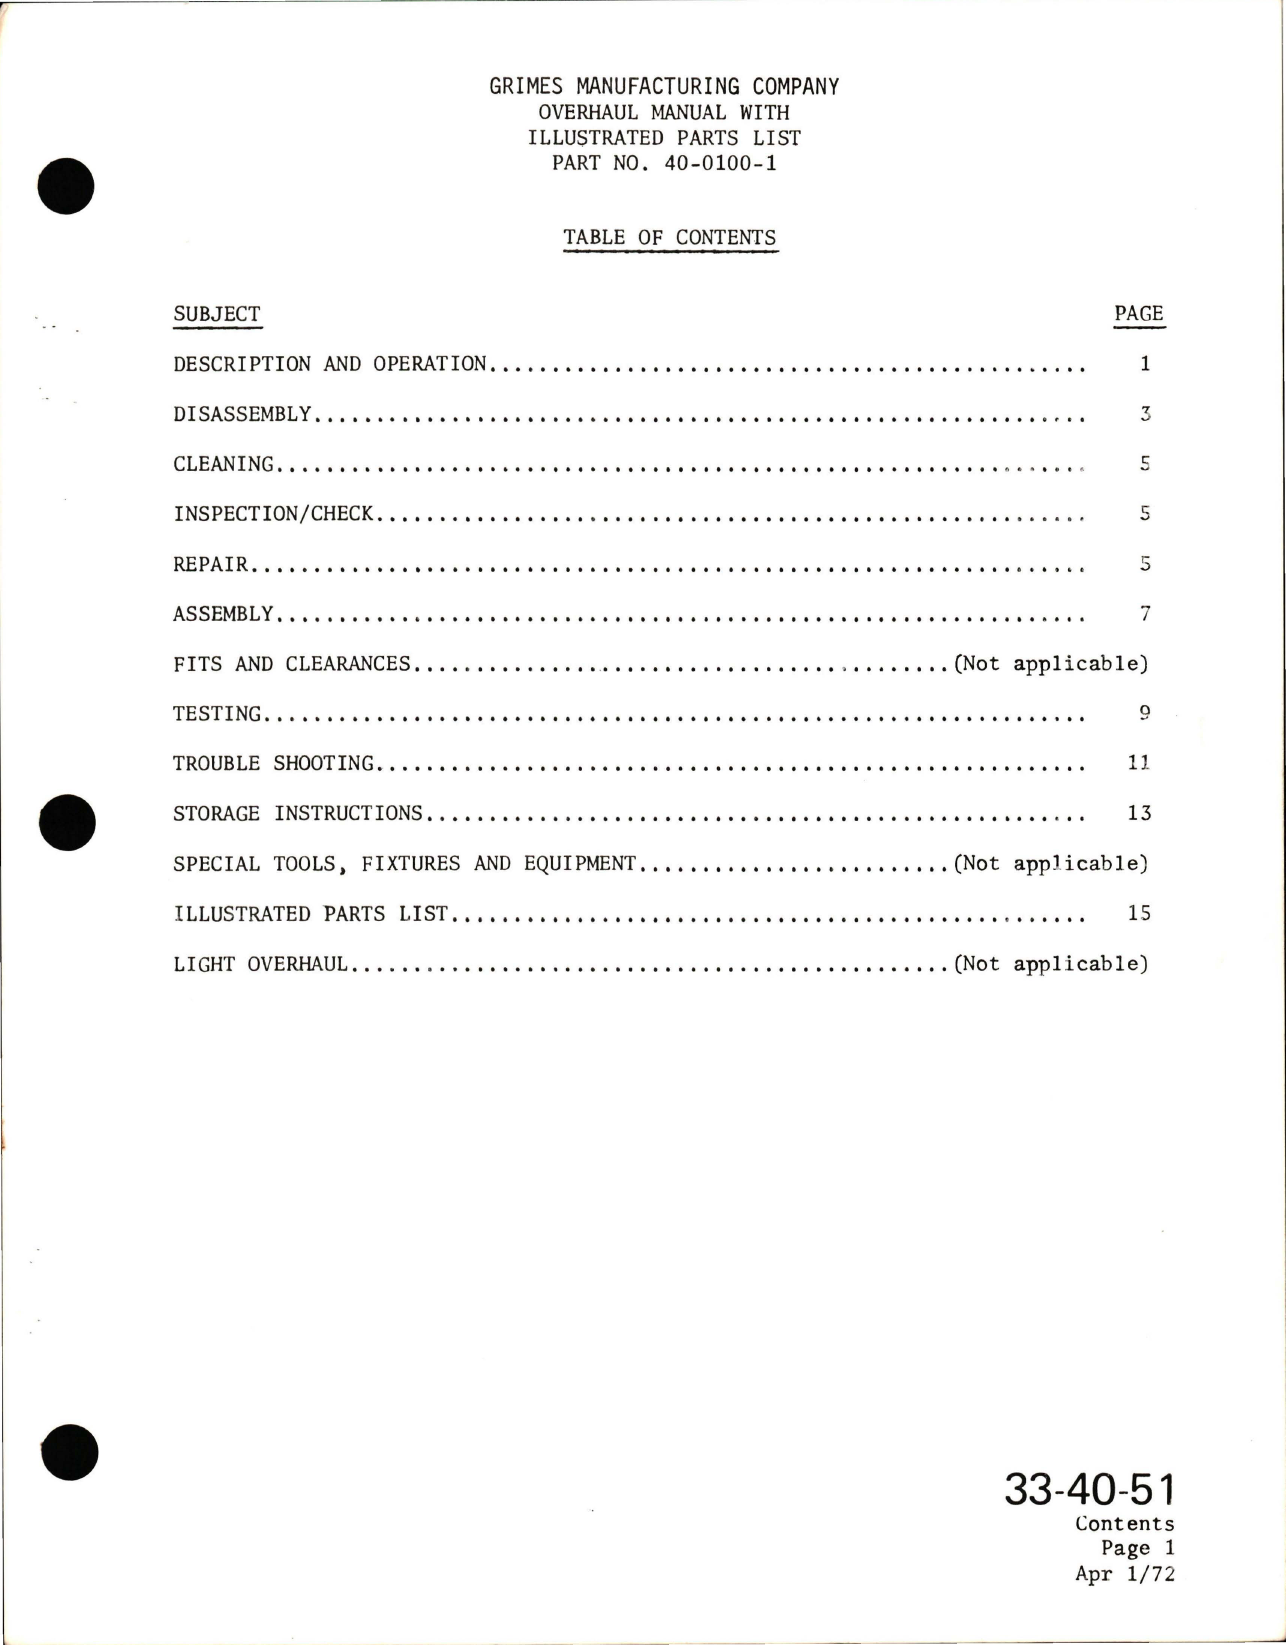 Sample page 7 from AirCorps Library document: Overhaul with Illustrated Parts List for Tandem Oscillating Aircraft Navigational Light